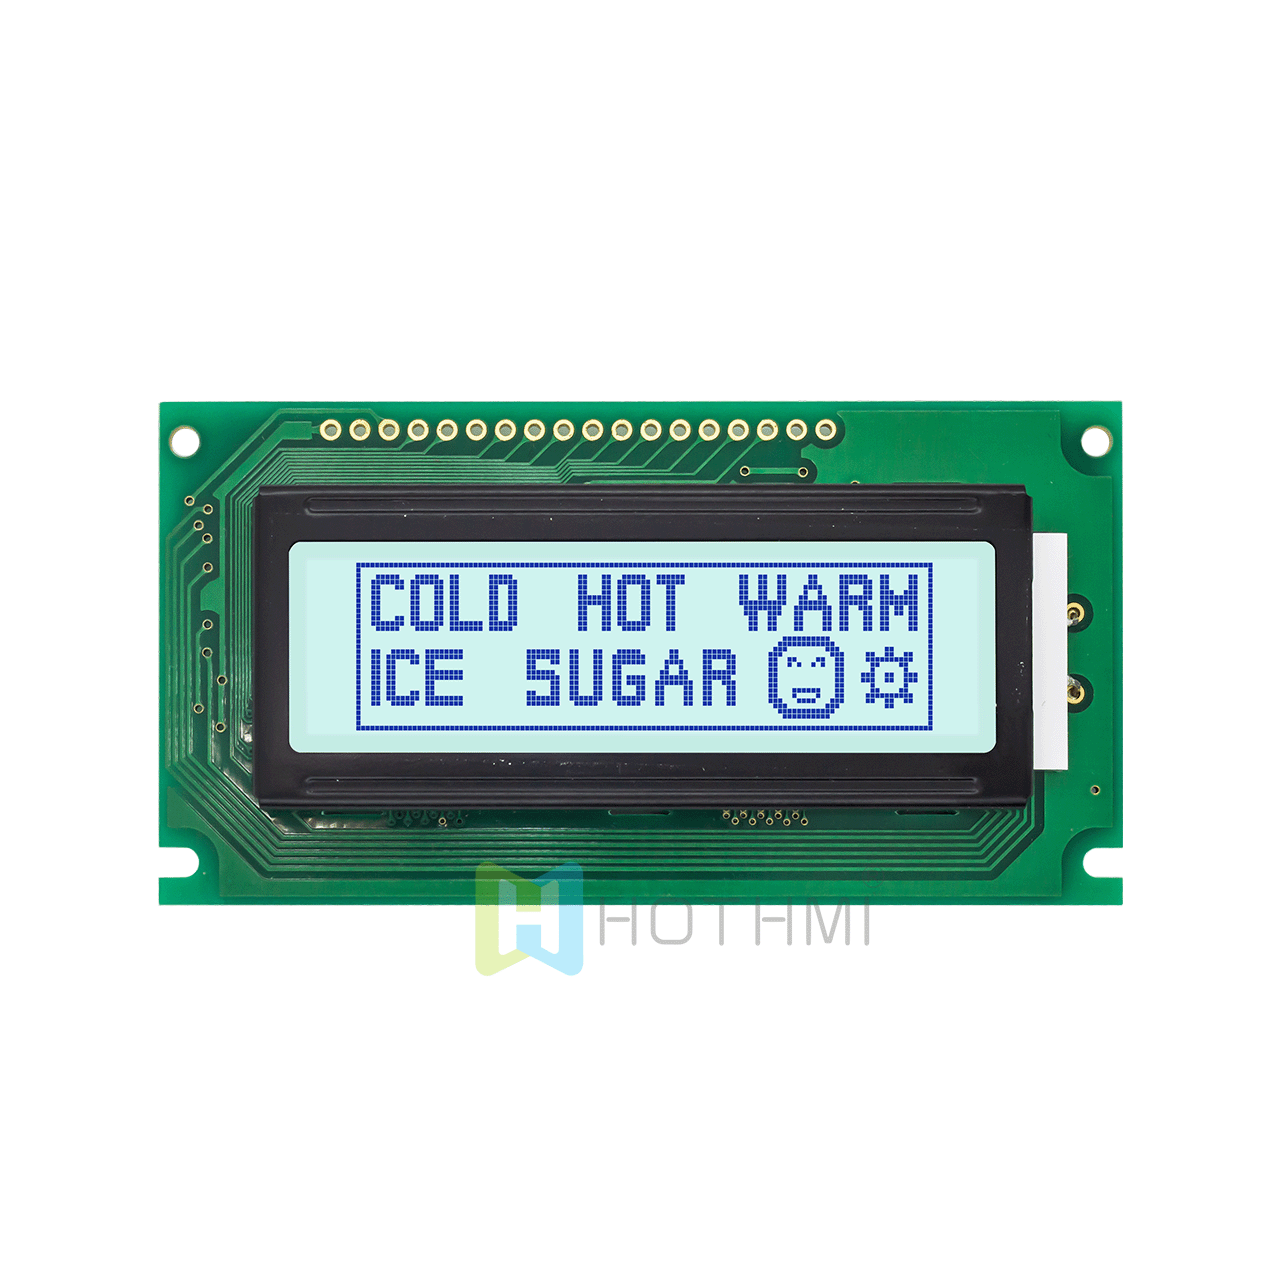 2.5"122X32 Graphic LCD Module | DFSTN-Black Display with Side White Backlight and Pin Header | 5.0v | Monochrome Display